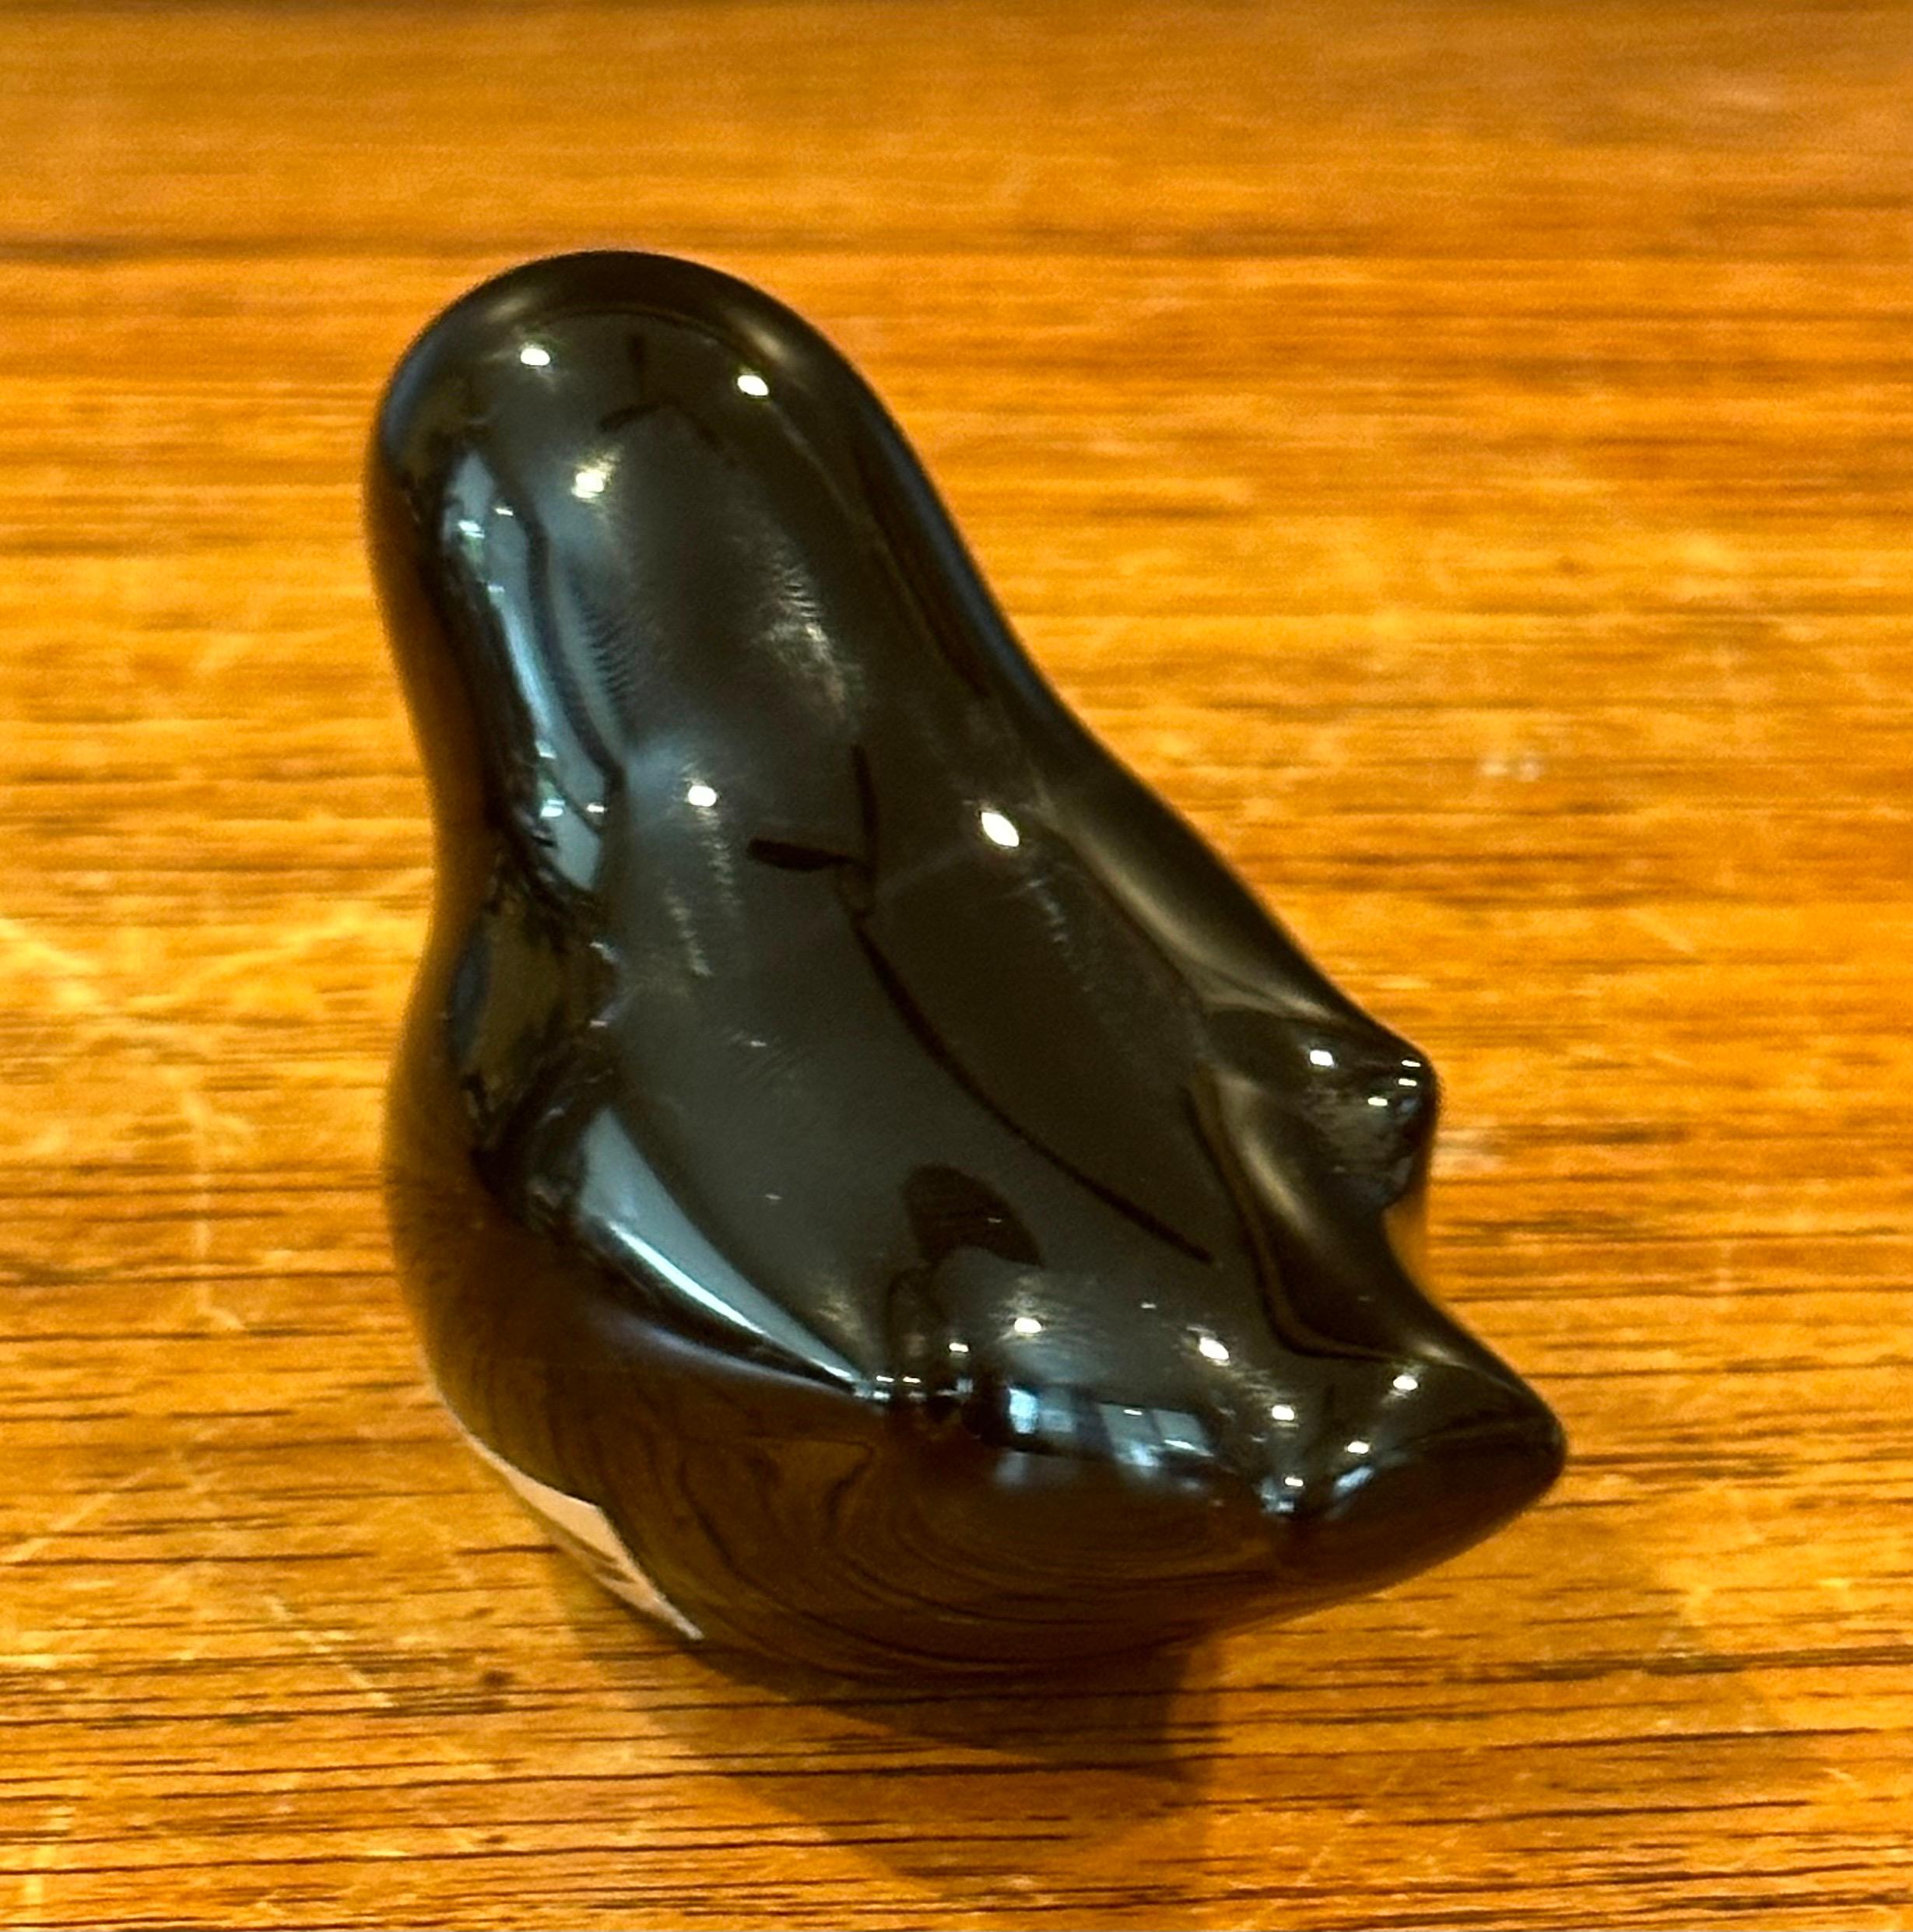 20th Century Small Art Glass Bird Paperweight / Sculpture by Nuutajarvi of Finland For Sale